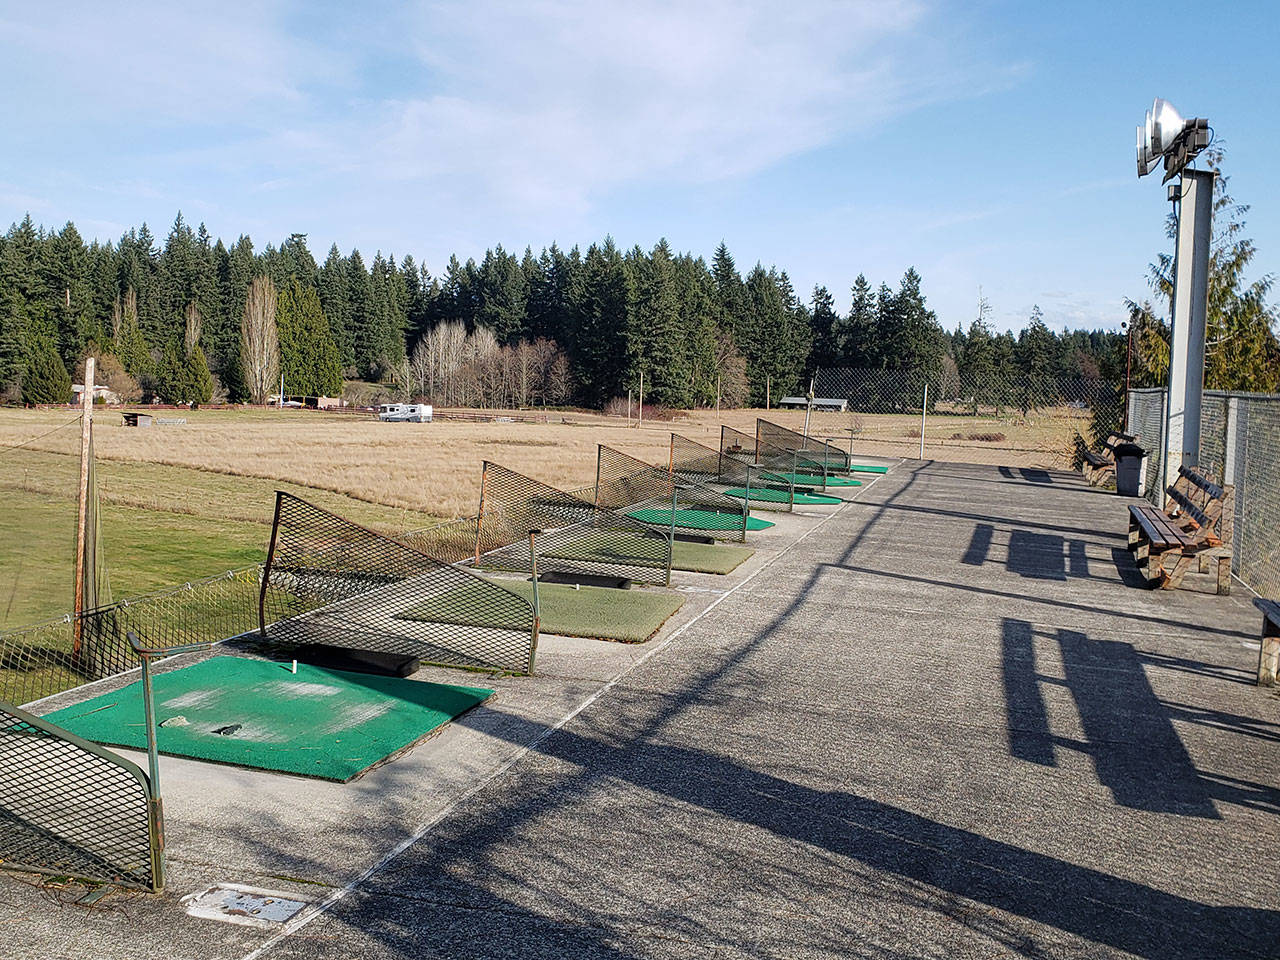 NW Golf Range to close before Christmas